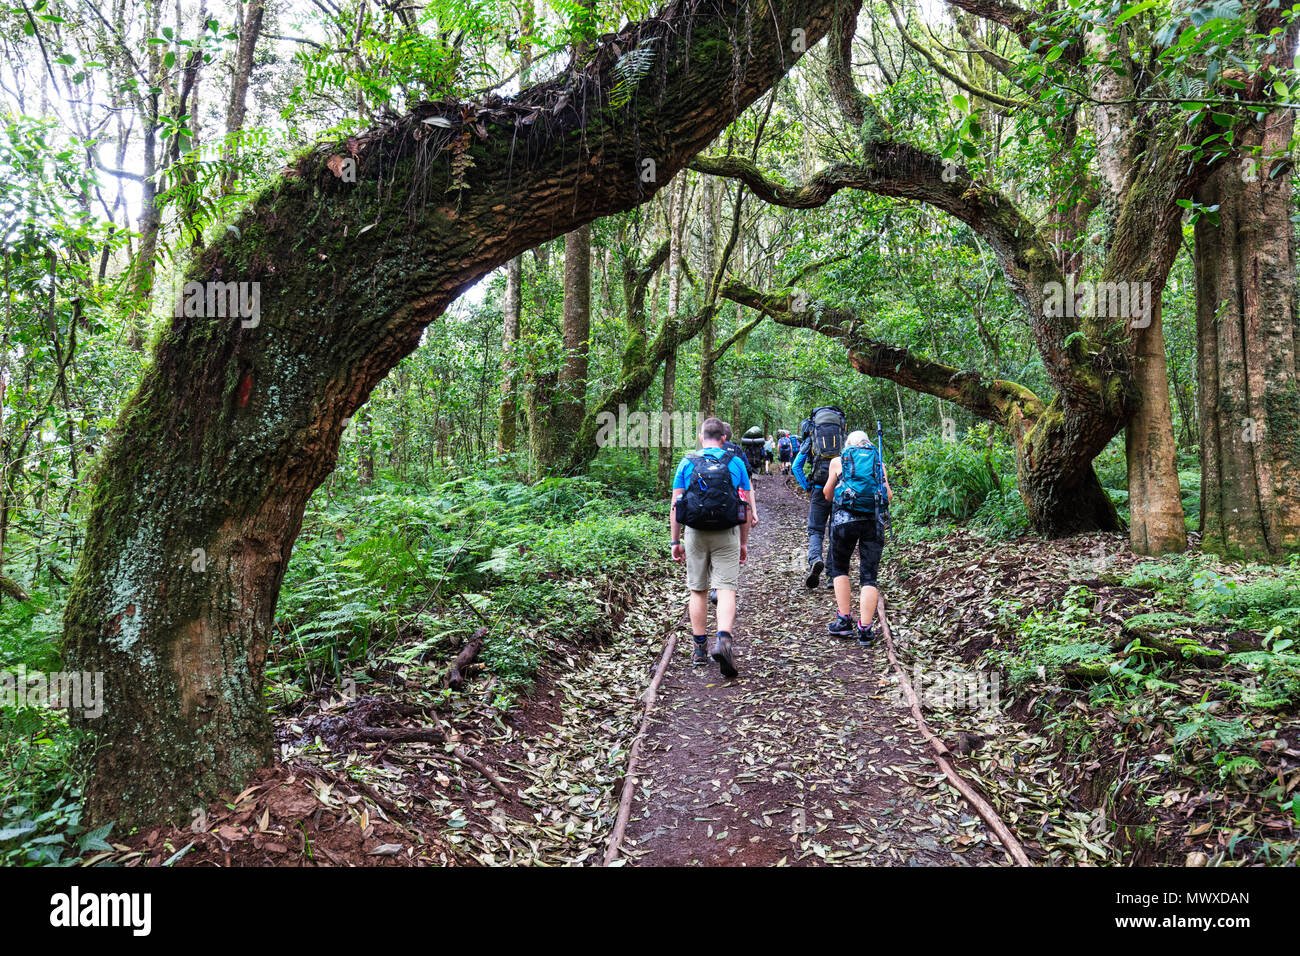 Hikers in the rain forest, Kilimanjaro National Park, UNESCO World Heritage Site, Tanzania, East Africa, Africa Stock Photo